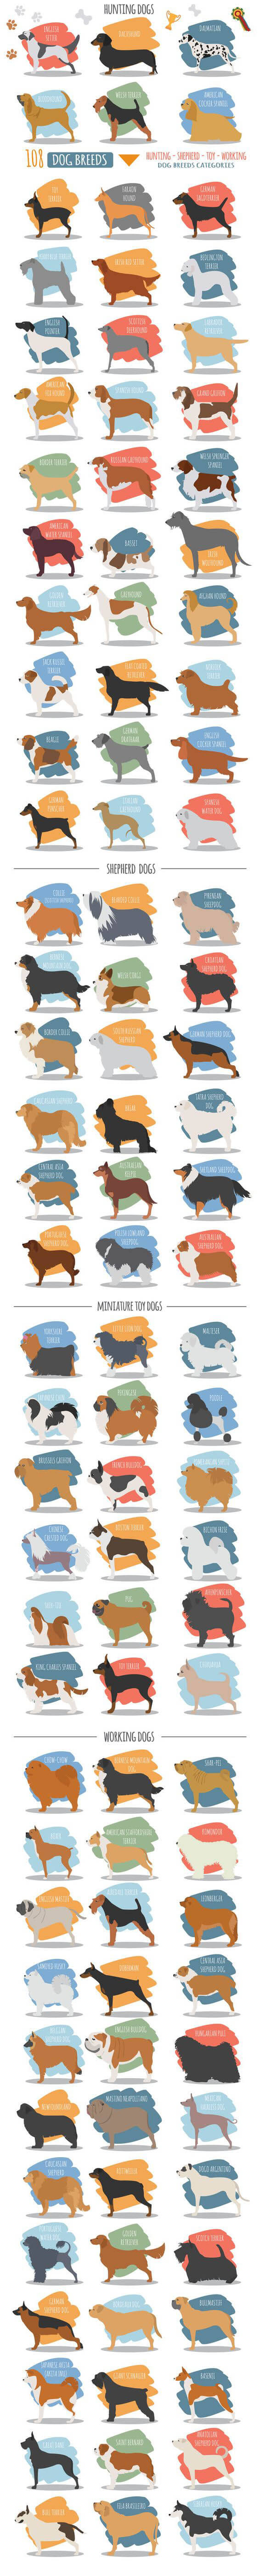 DOG BREED GROUPS WORLDWIDE INFOGRAM, INFOGRAPHIC - PRESS TO SEE IN FULL SIZE!!!